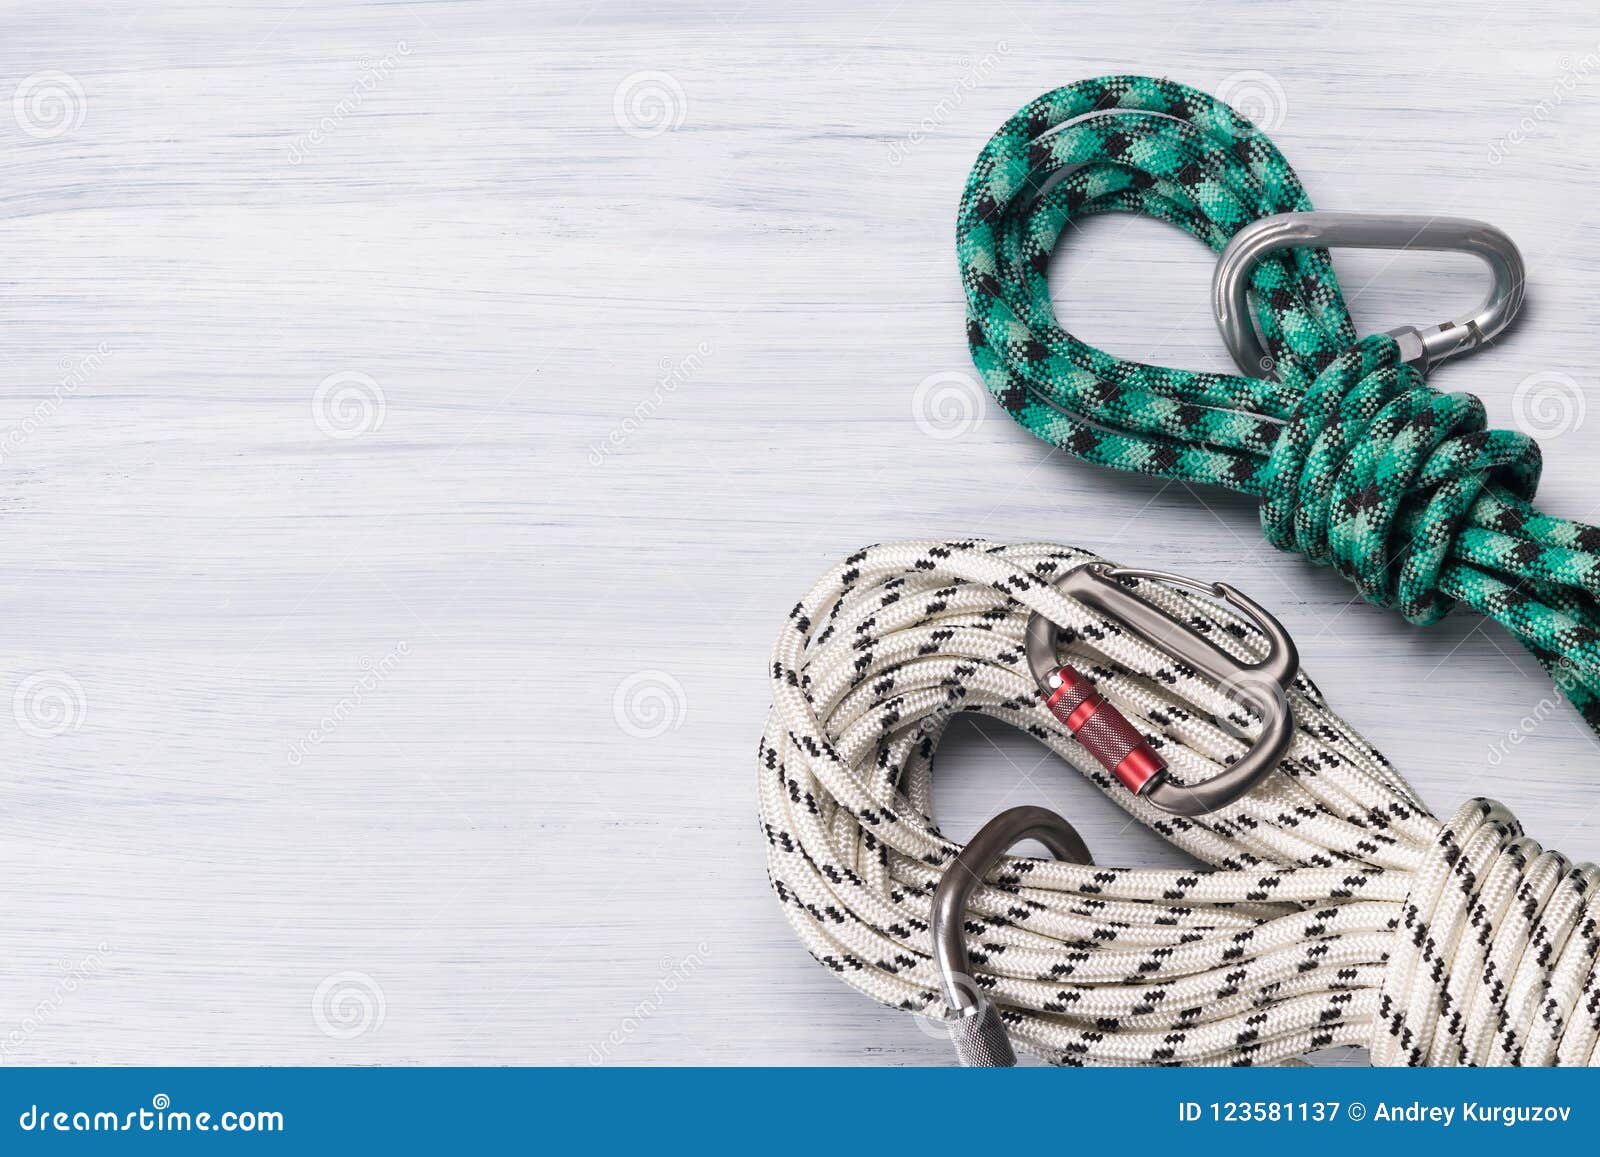 Safety Ropes with Snap Hooks for Climbing on a Light Background